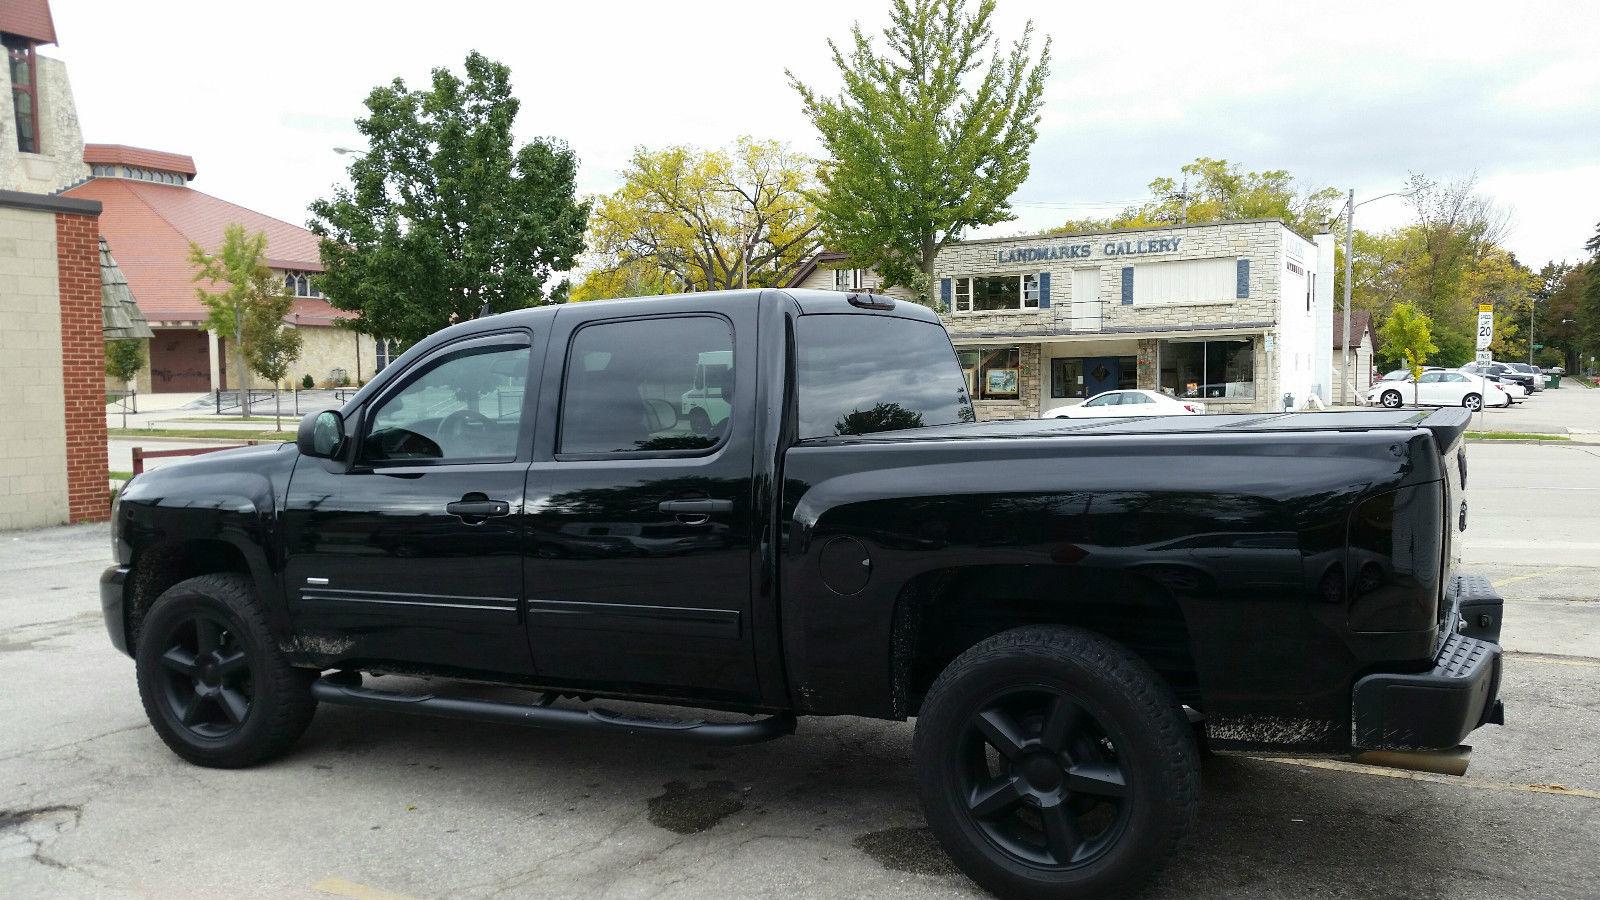 2010 Chevrolet Silverado 1500 LT 4×4 Crew Cab Supercharged for sale